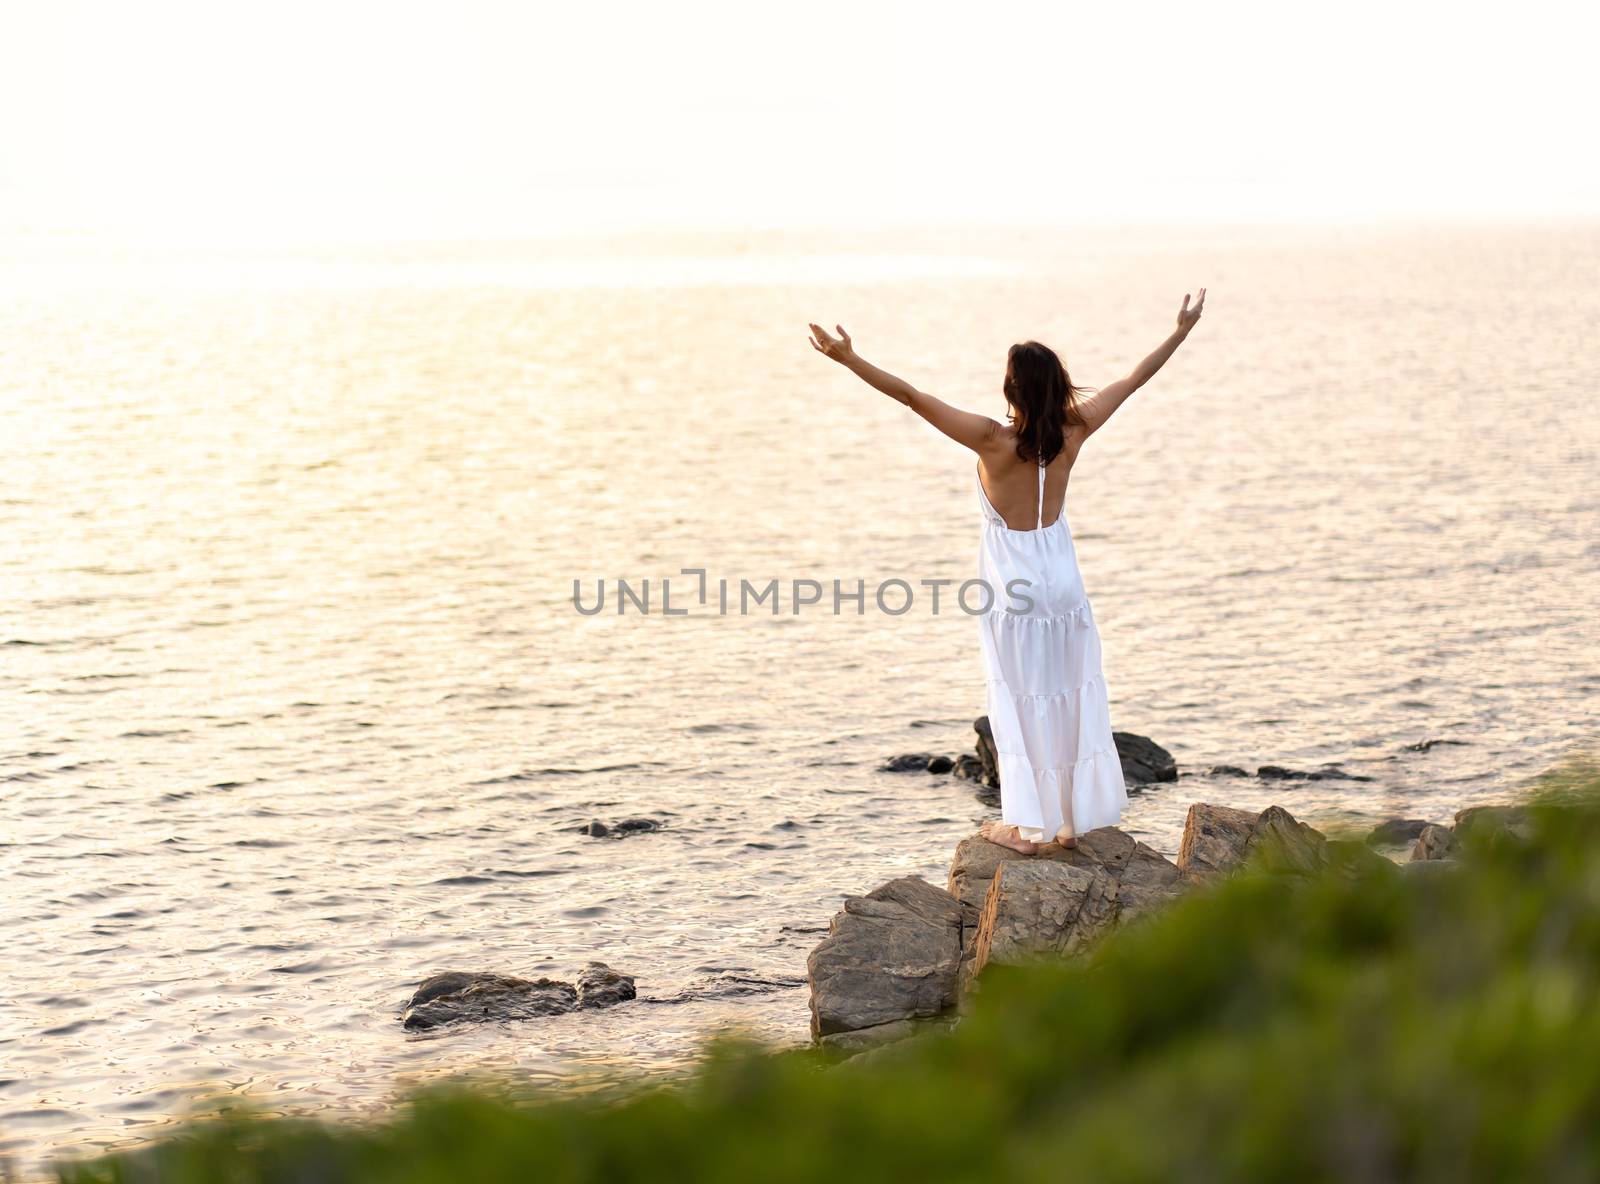 View from back of an unrecognizable woman with white long dress and open arms upwards looking at the setting sun - Alone female person with barefoot on sea rocks embracing nature as a sign of devotion by robbyfontanesi